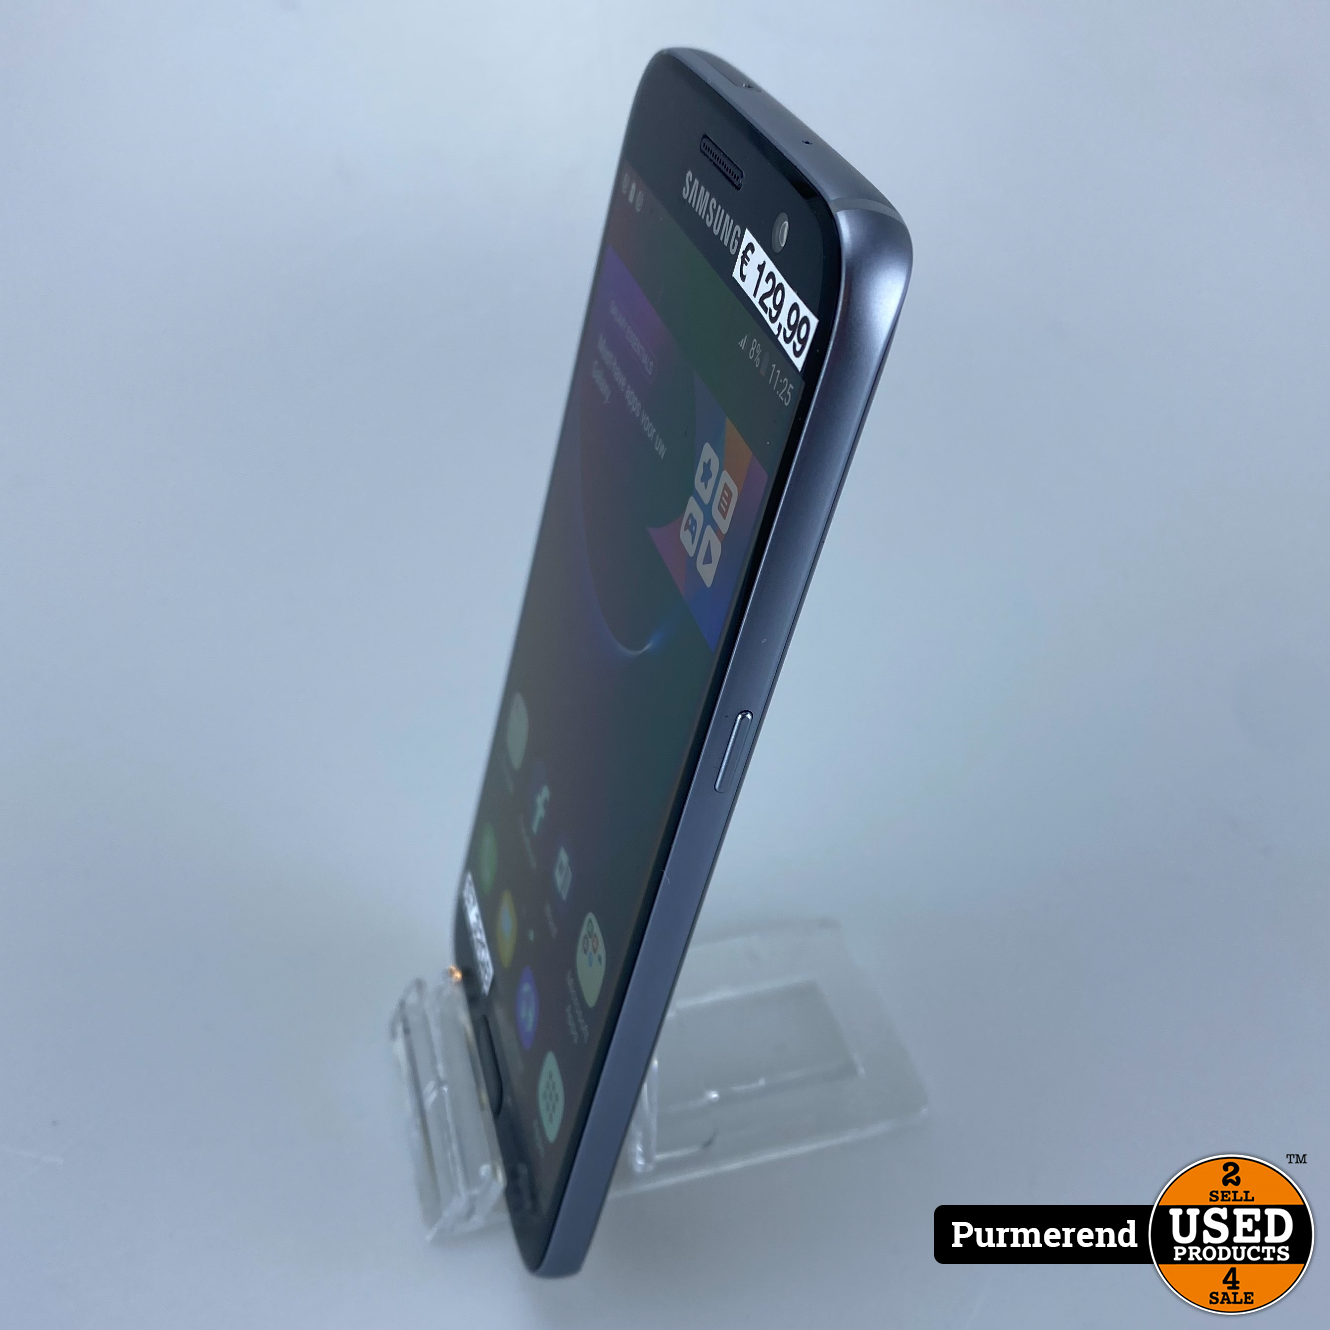 Samsung Galaxy S7 32GB Zwart Nette - Used Products Purmerend